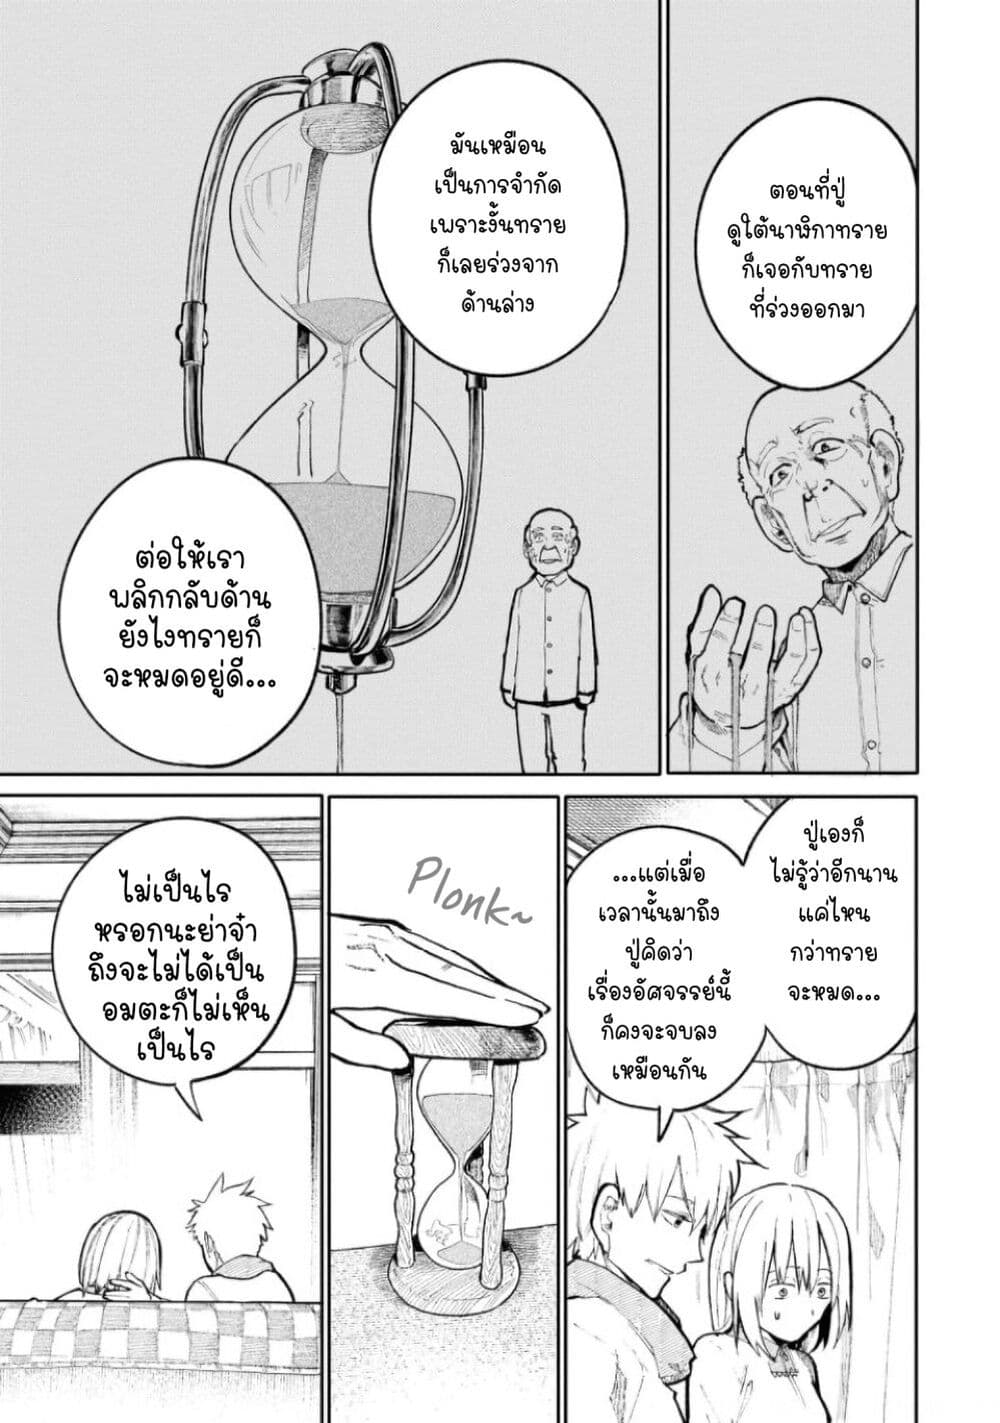 A Story About A Grampa and Granma Returned Back to their Youth คู่รักวัยดึกหวนคืนวัยหวาน 59-59